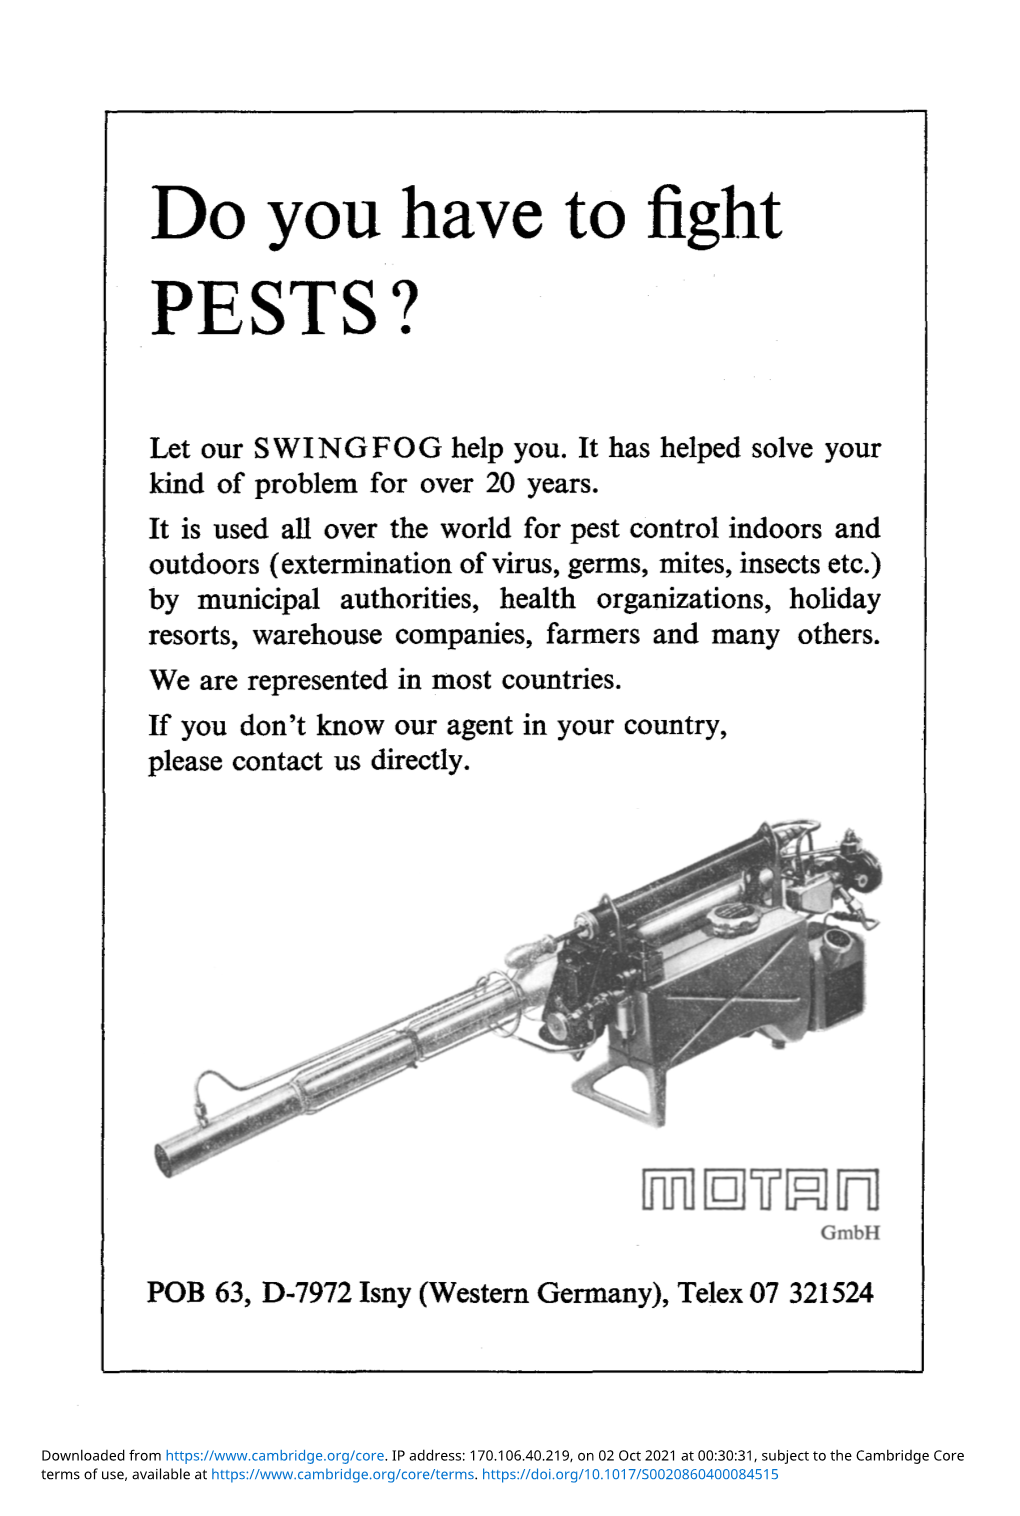 Do You Have to Fight PESTS?